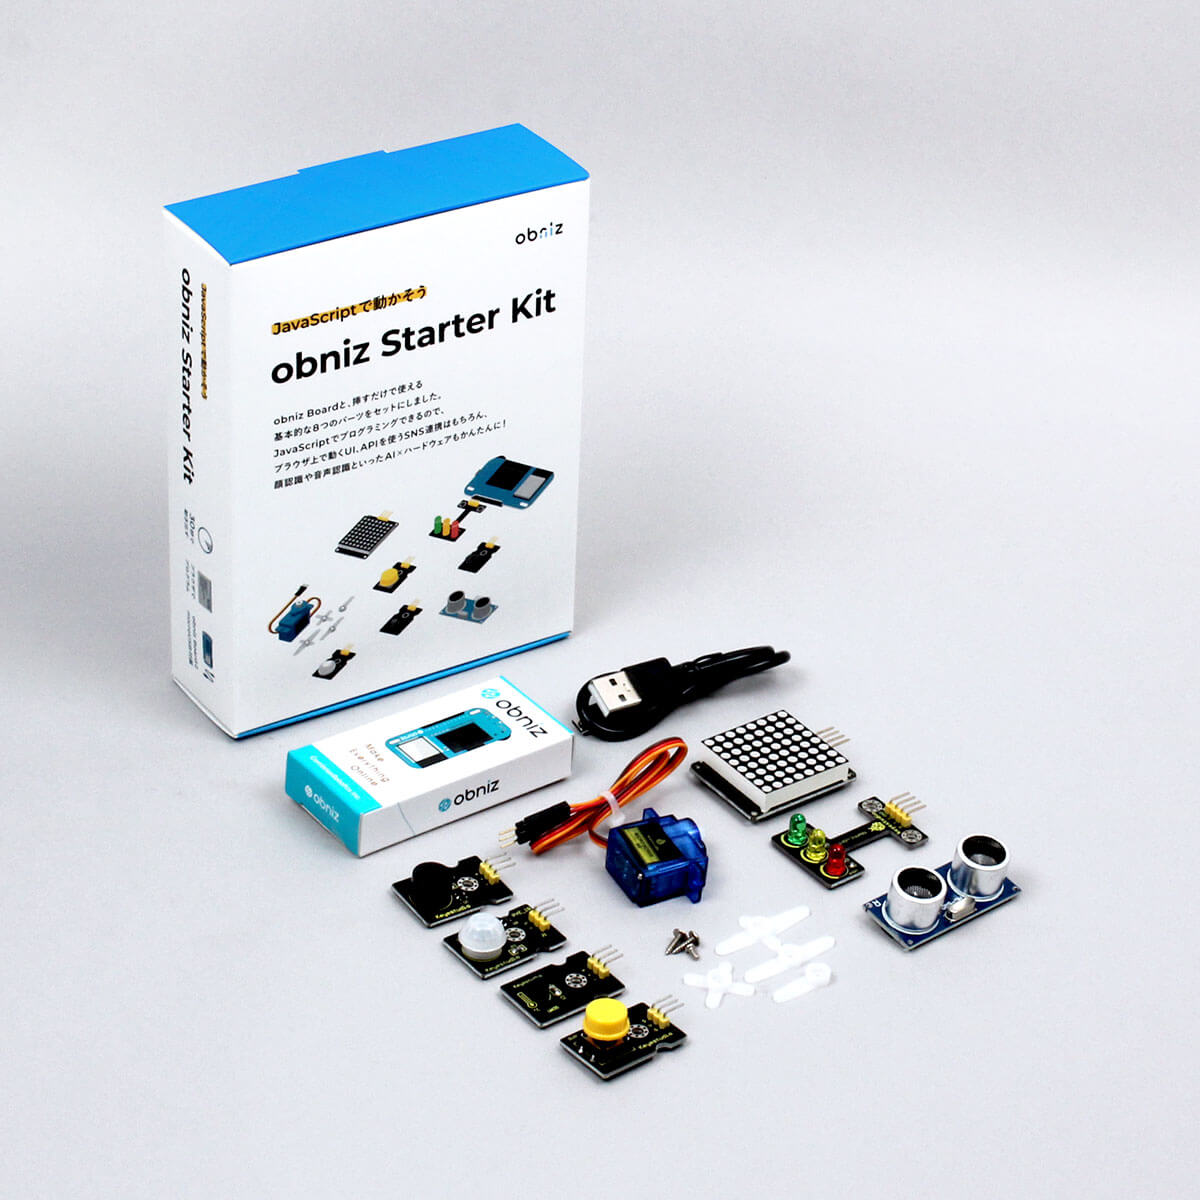 Products -obniz Official Device- | IoT for all developer with just 